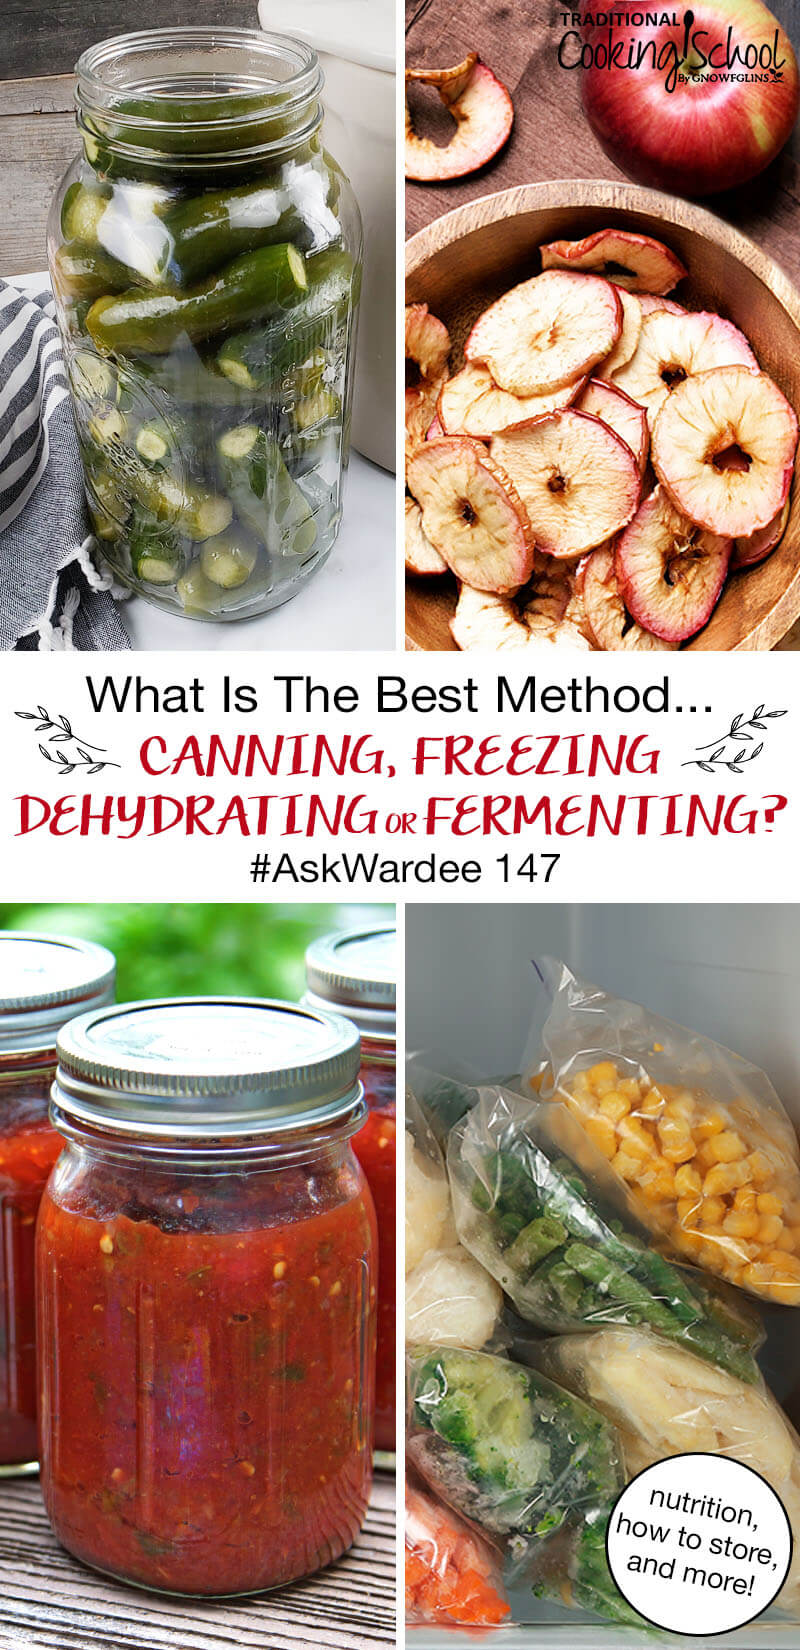 photo collage of food in jars, in freezer bags, and on a dehydrator tray, with text overlay: "What Is The Best Method... Canning, Freezing, Dehydrating or Fermenting? #AskWardee 147 (nutrition, how to store, and more!)"